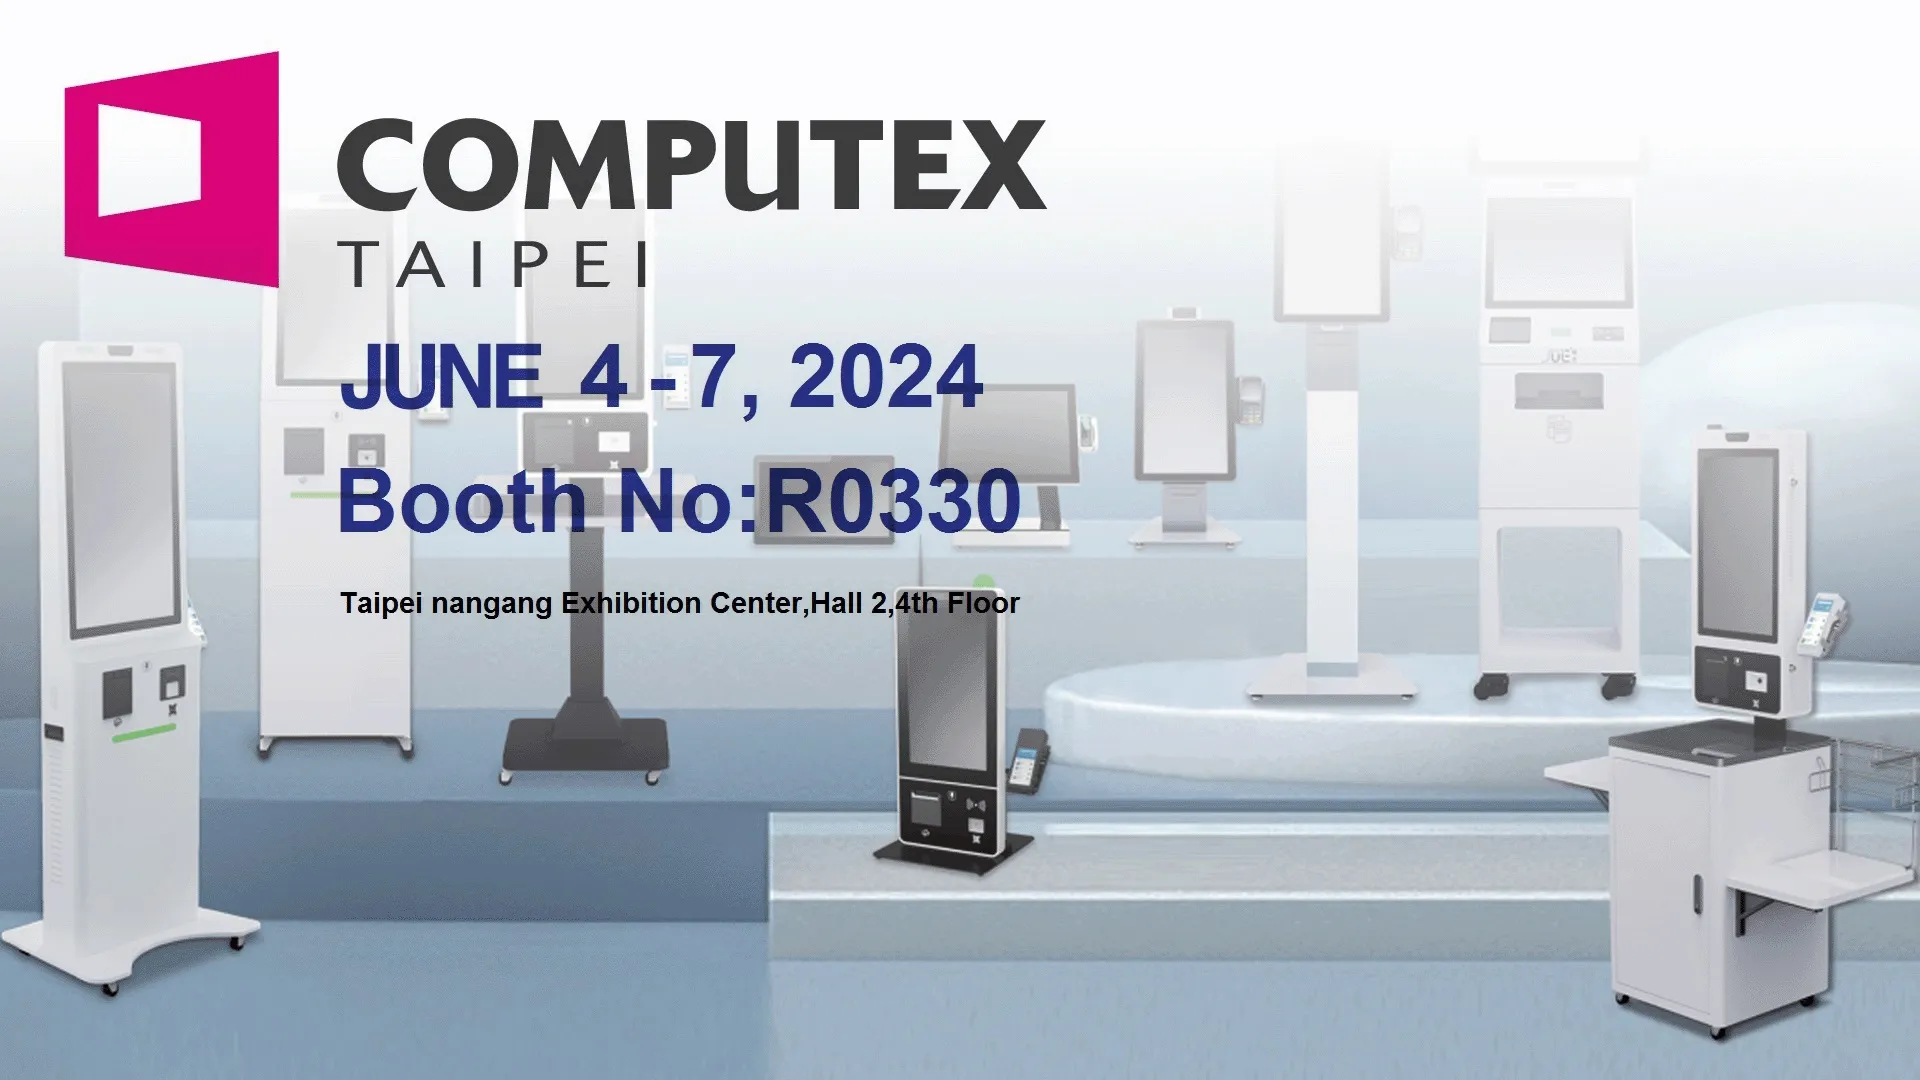 Welcome your visit to Computex !